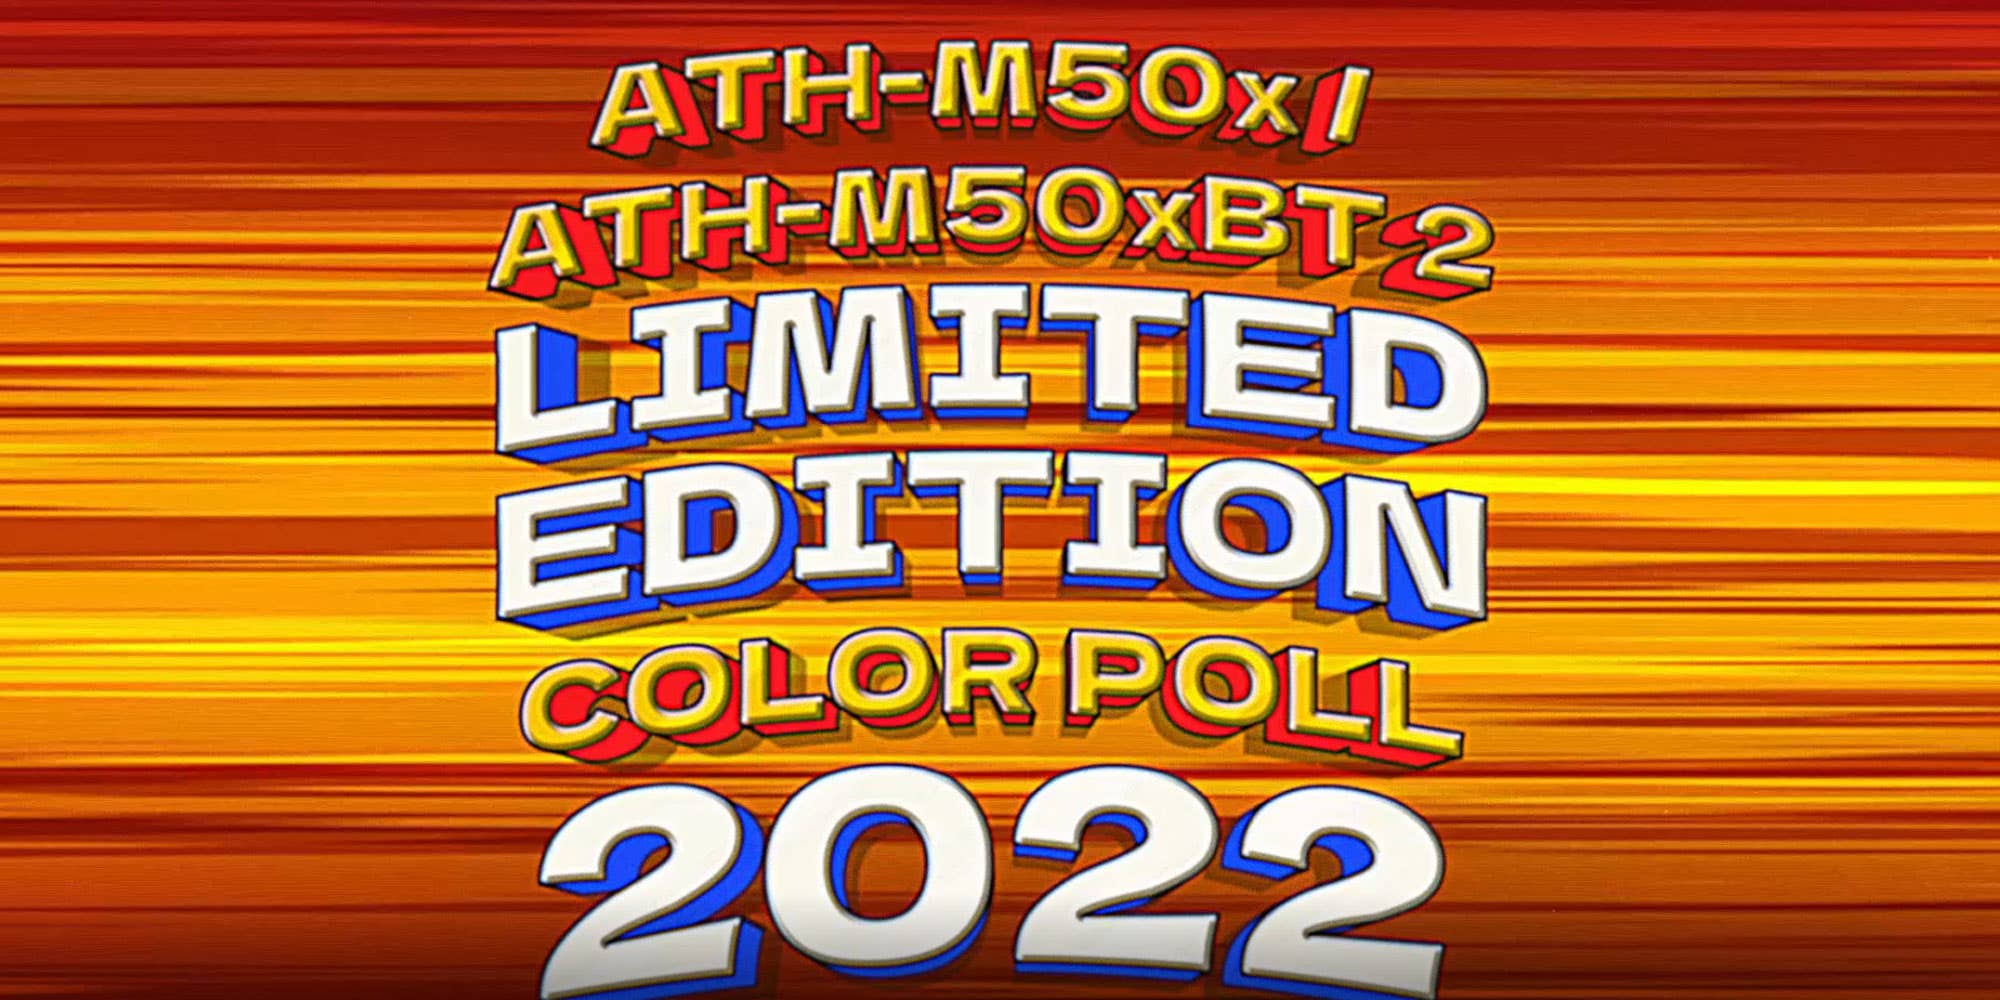 The Battle is On! 2023 Limited Edition M50x Colour Poll